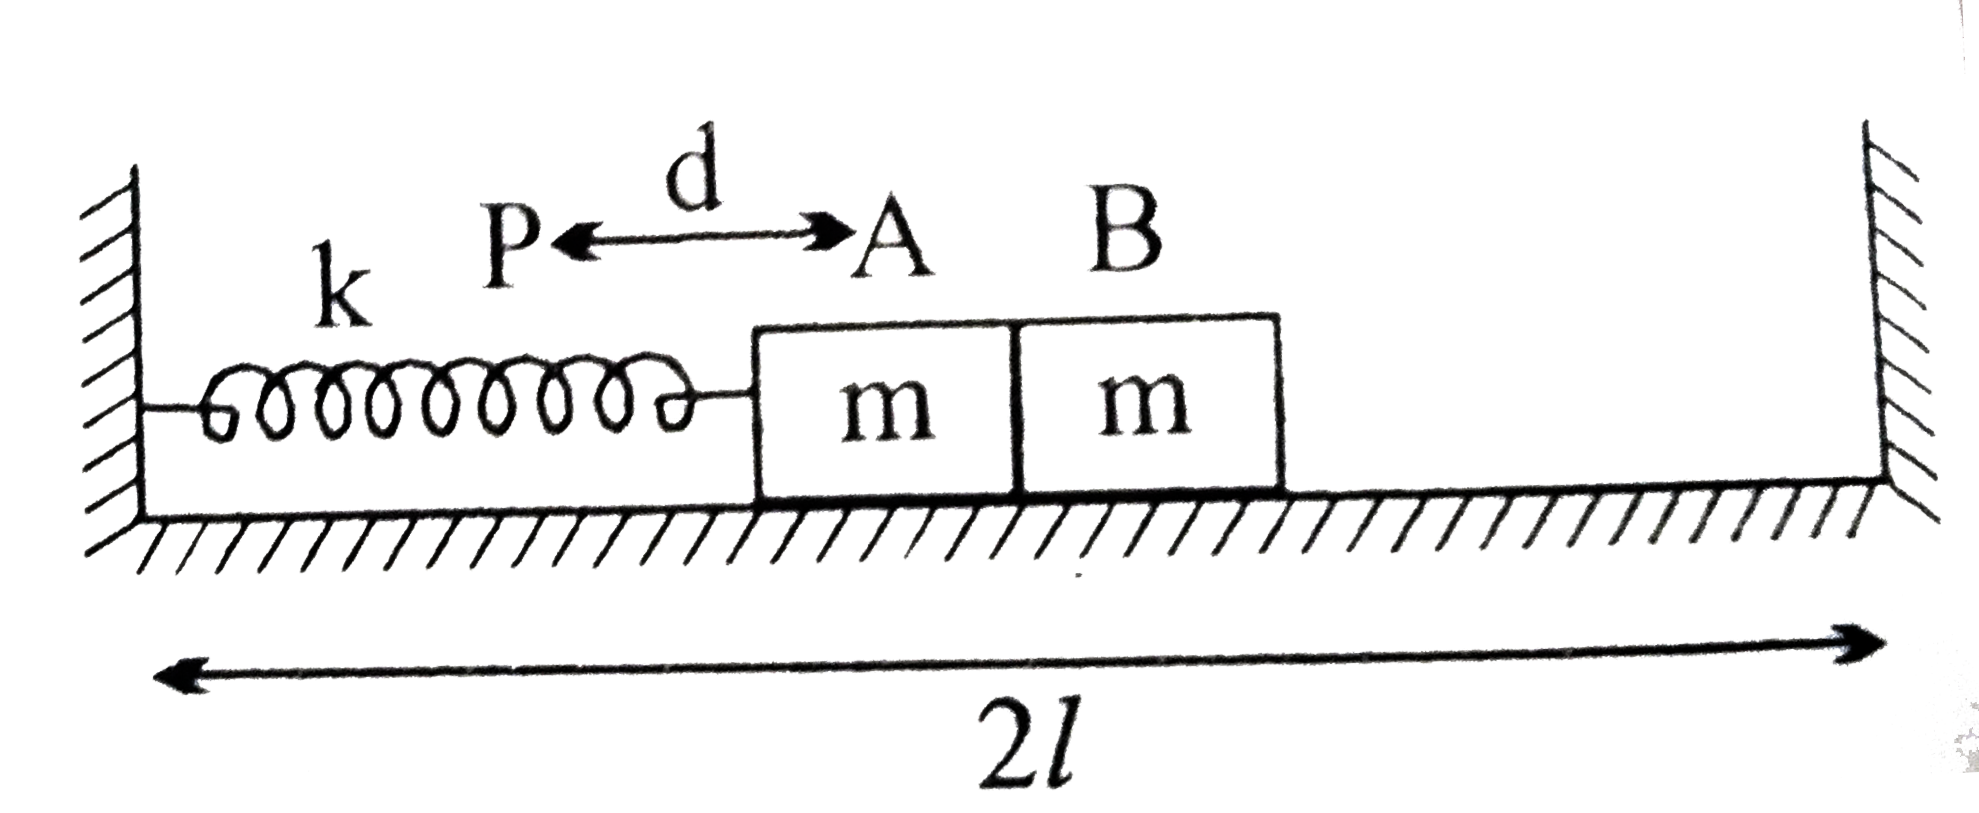 Two small blocks A and B of sam mass m are placed at the mid point of a smooth horizontal track of length 2l as shown. A massless spring of force constant k and free length l is touching the block A but is not attached to it. The block A is displaced towards left by a small distance d=AP thereby causing a compression in the spring. The block is then let free to move. The minimum time after colliding with B the block A again reaches its starting position is